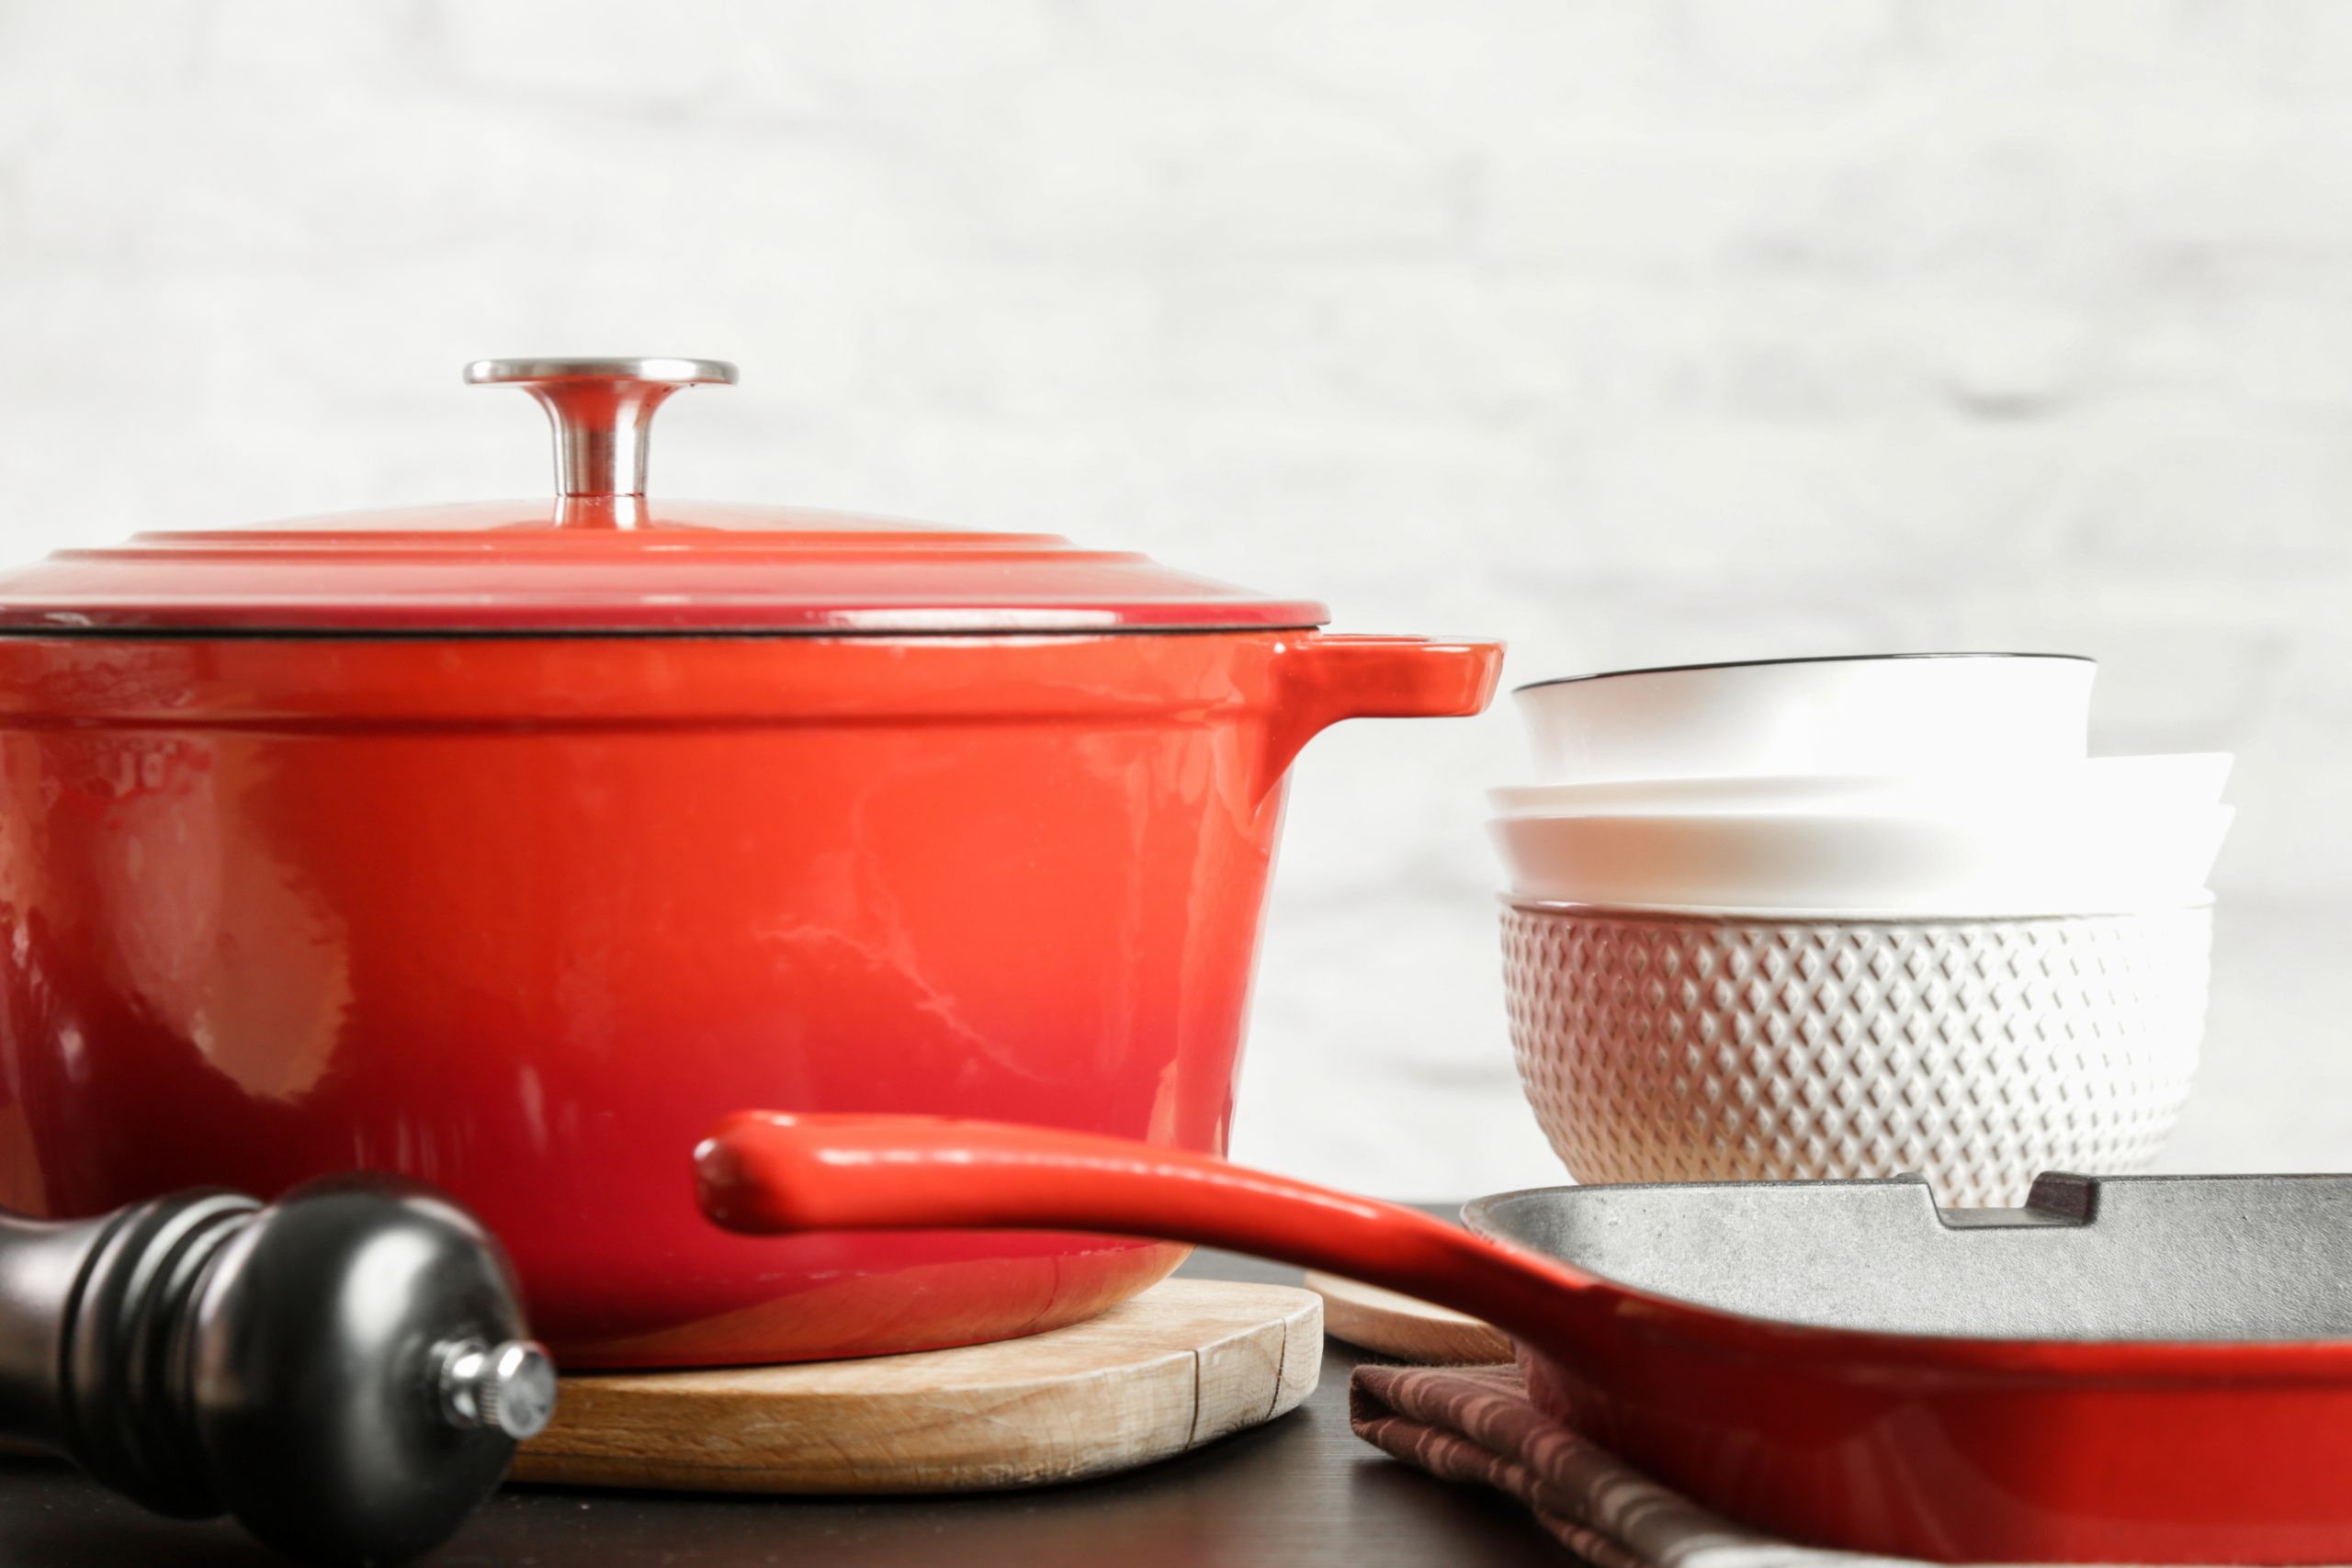 10 High-Quality and Non-Toxic Ceramic Cooking Appliances - One 